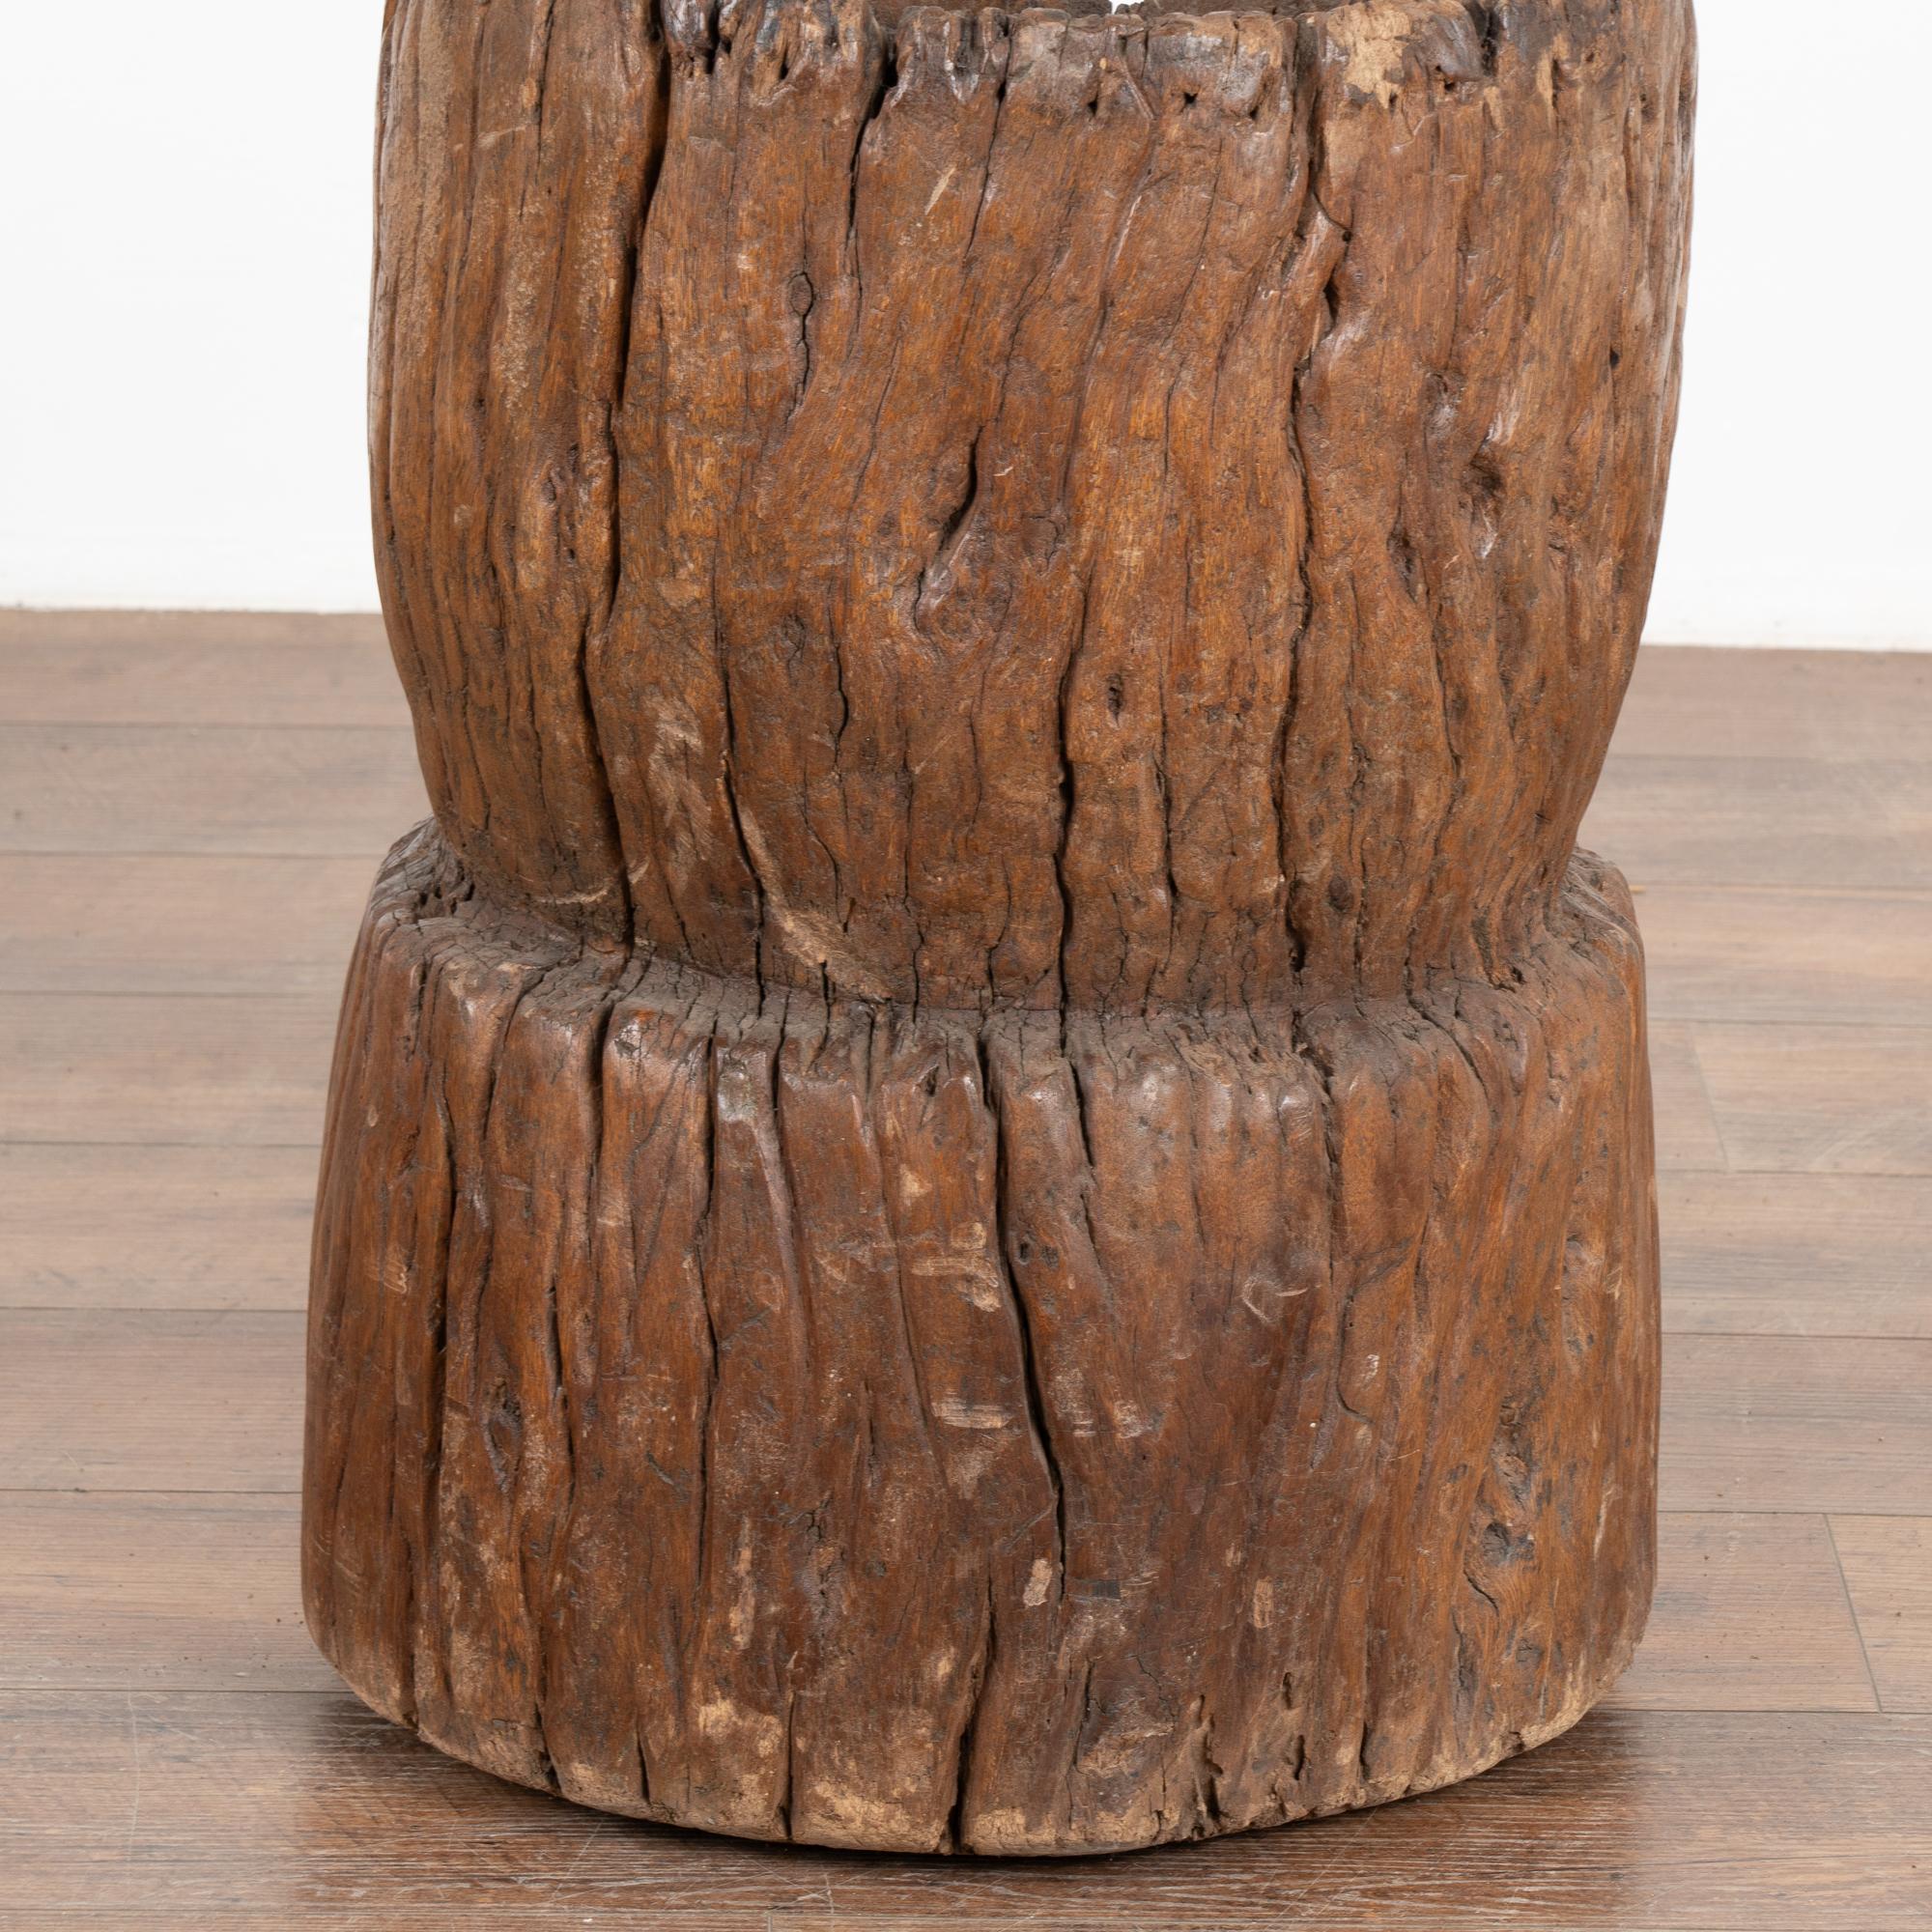 Wood Sculpture Container from Old Water Mill Gear, China 1820-40 For Sale 1